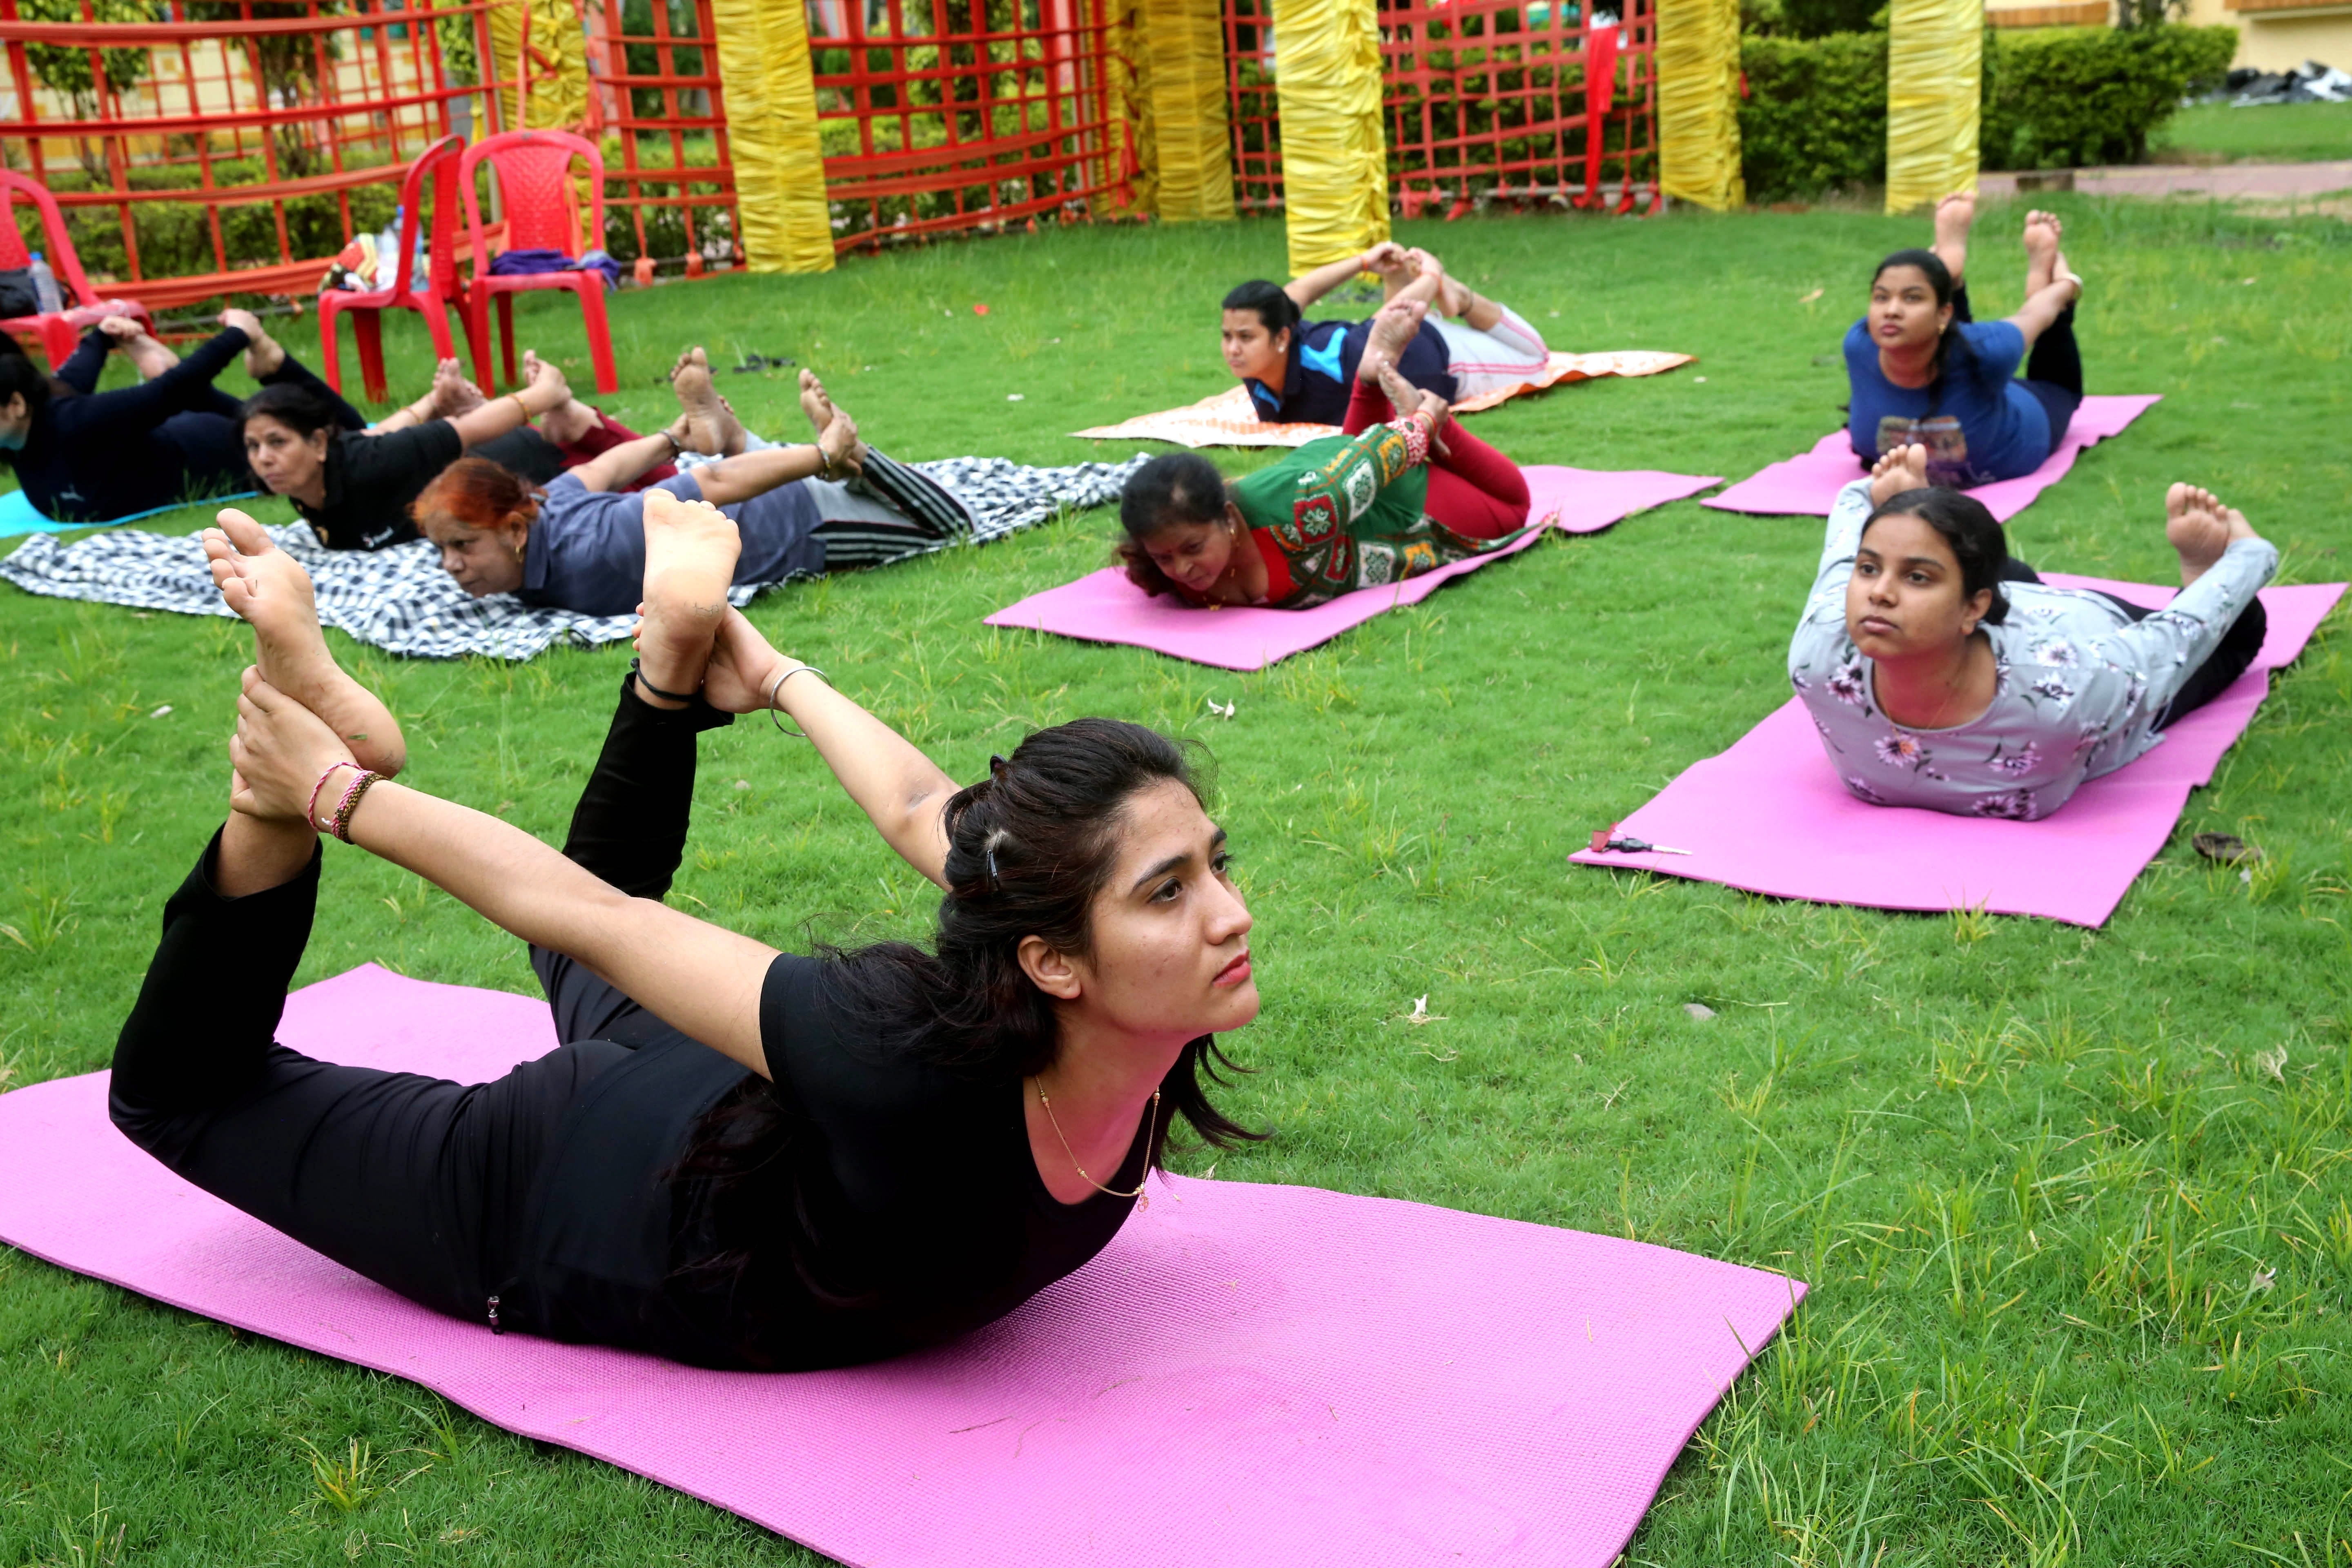 International Day of Yoga observed in Bhopal